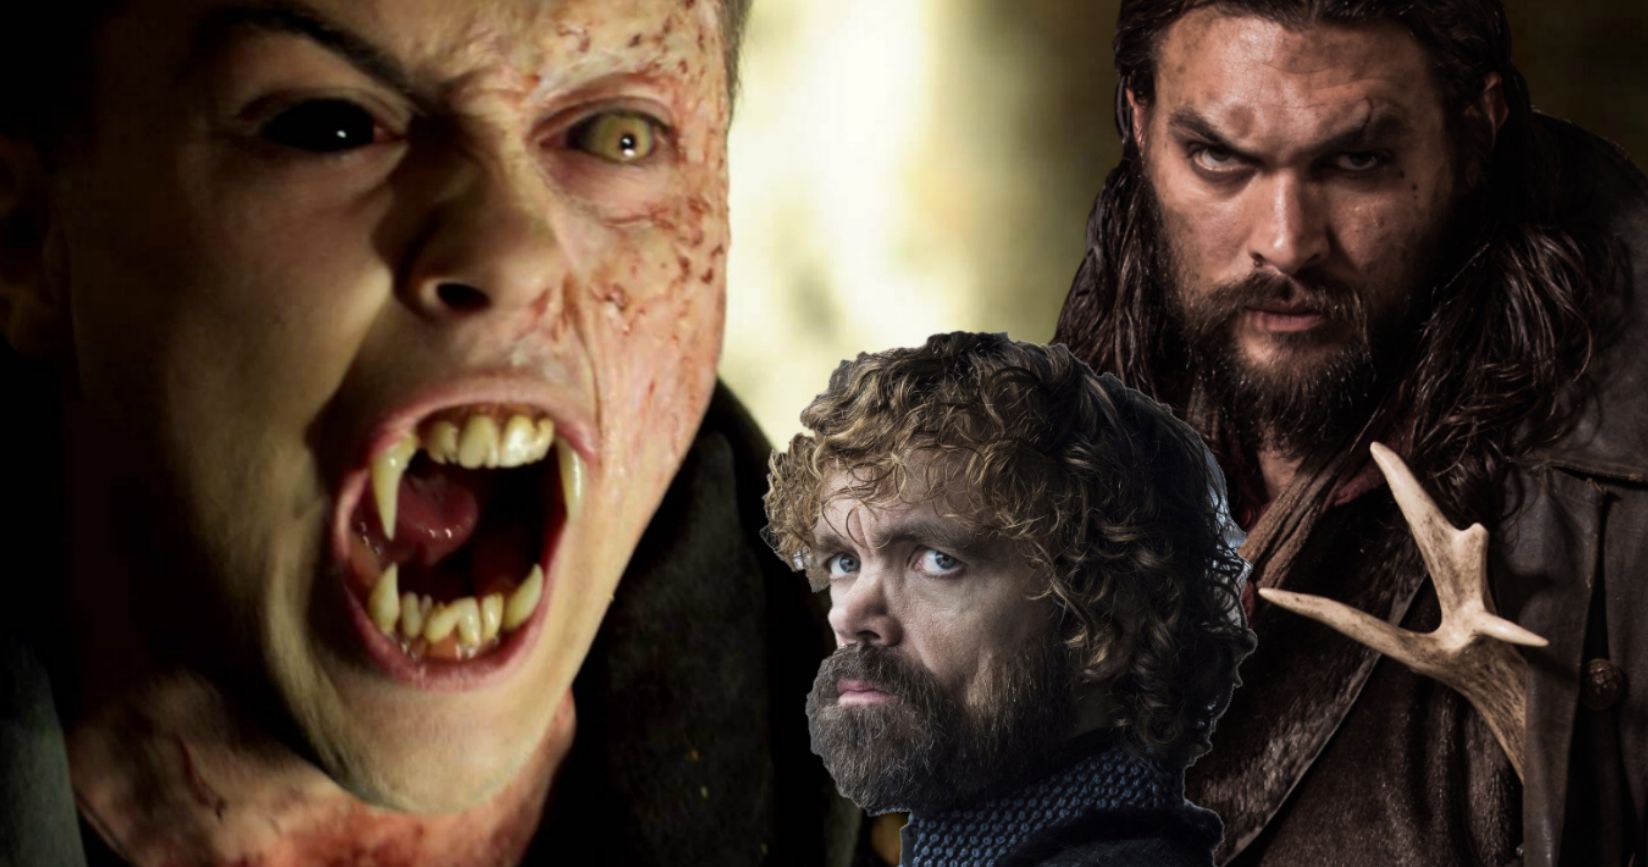 Peter Dinklage and Jason Momoa Team Up for Vampire Adventure Good Bad